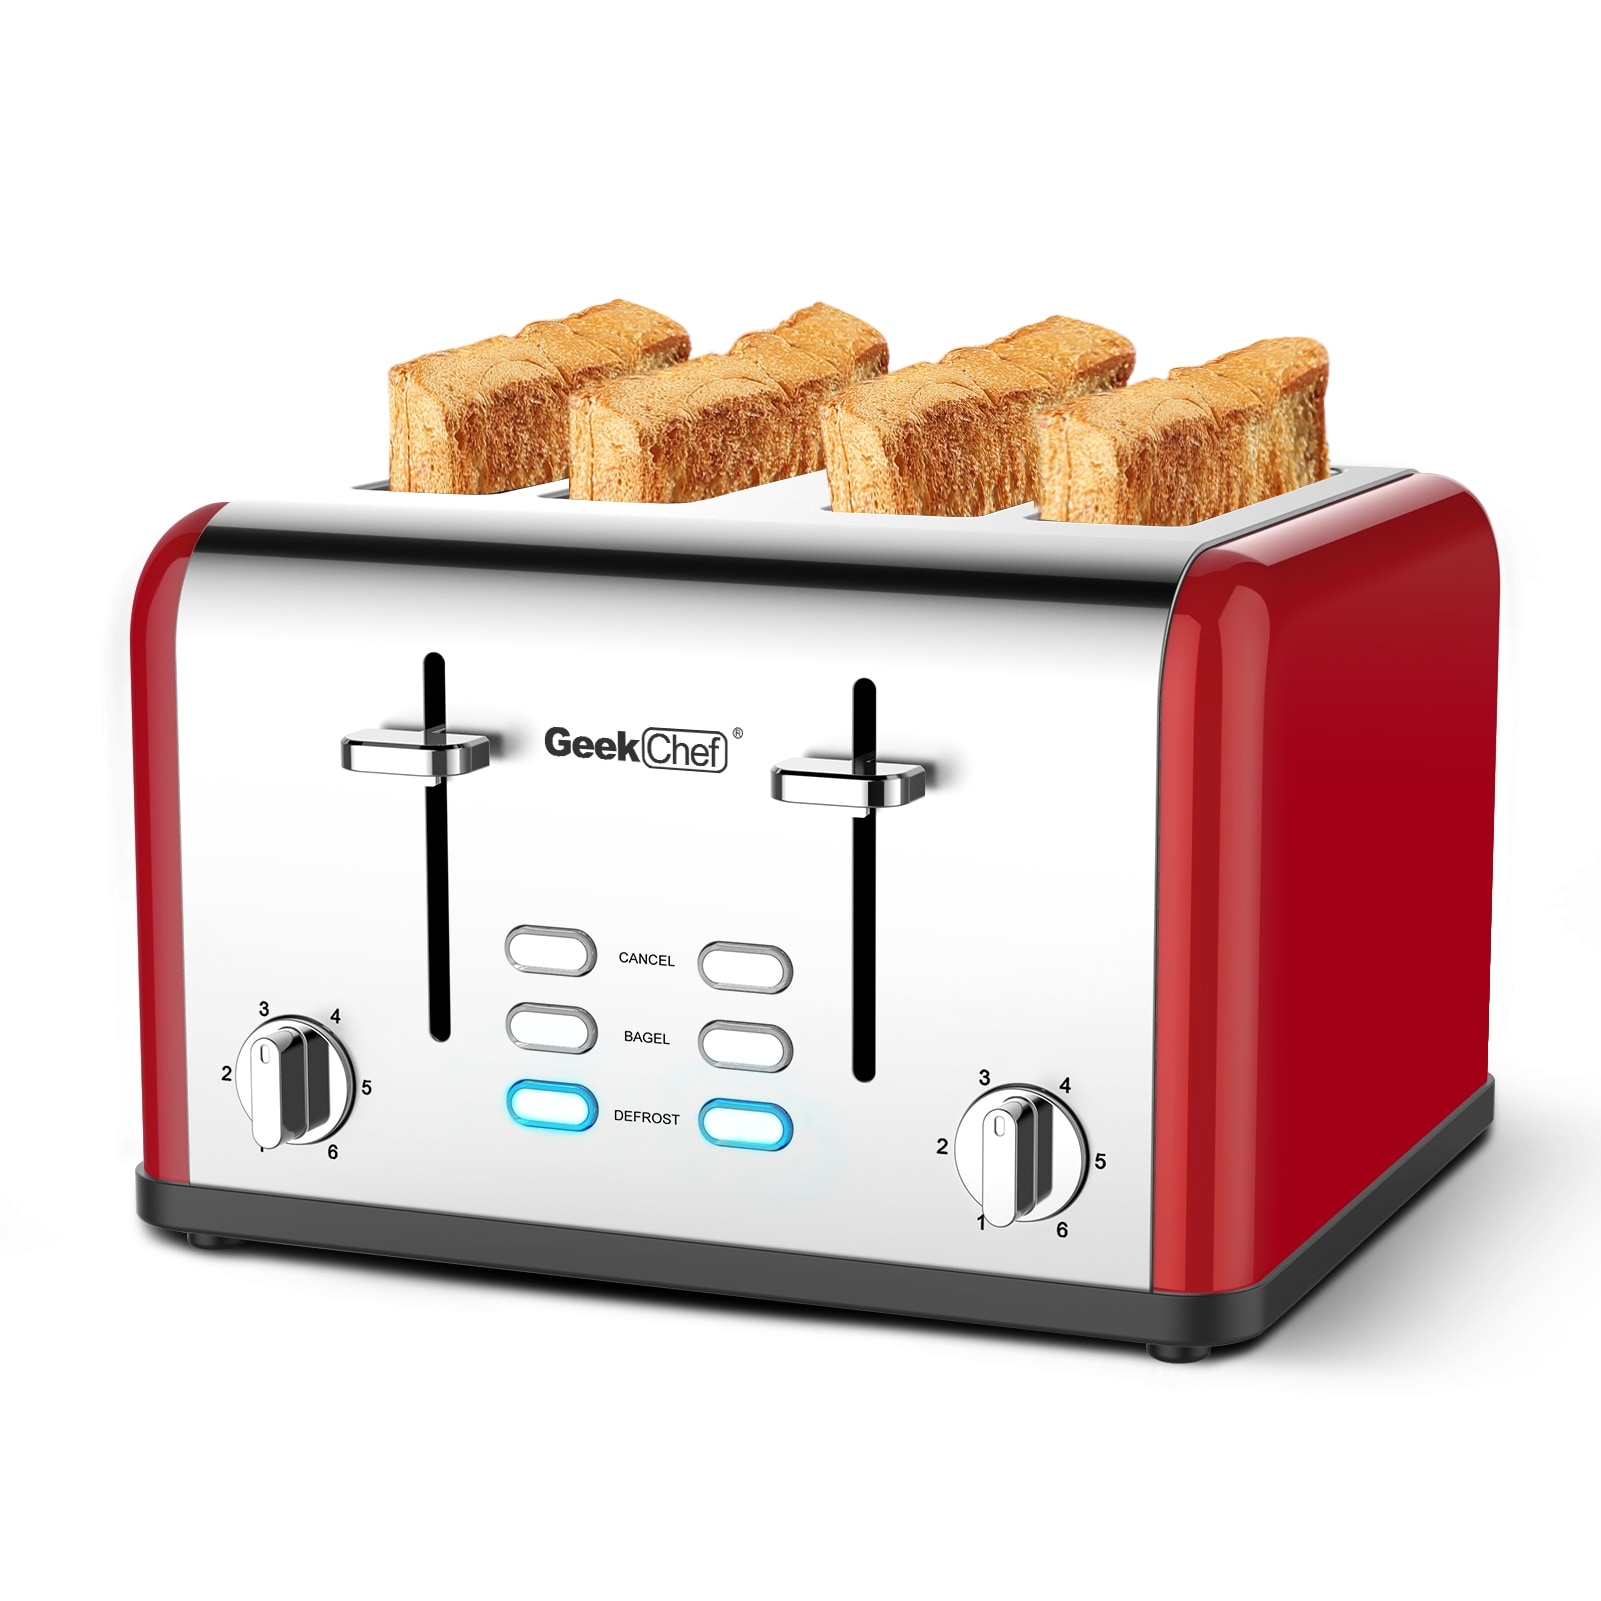 https://ak1.ostkcdn.com/images/products/is/images/direct/82e2cd5b39d25a9b63c52387ce31a4ebd415b5cb/Stainless-Steel-4-Slice-Toaster-Oven-With-Dual-Control-Panels.jpg